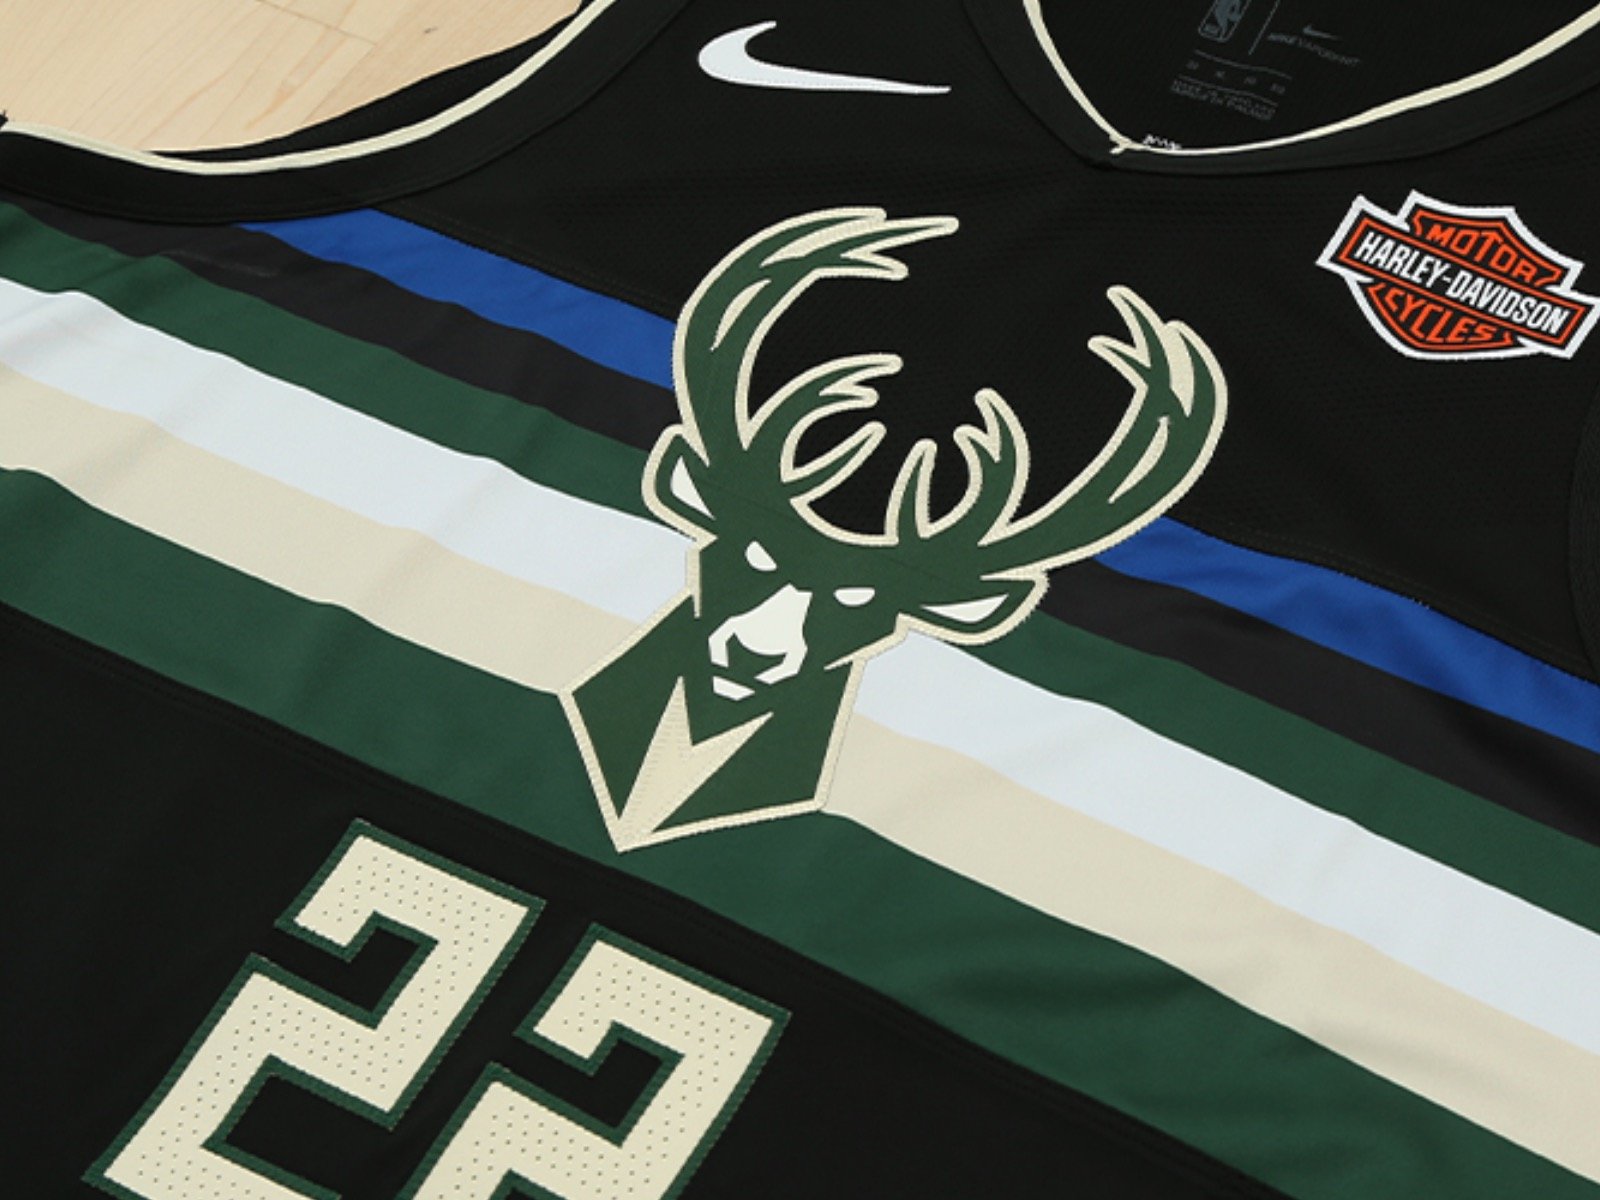 officially unveil new "Fear the Deer" uniforms